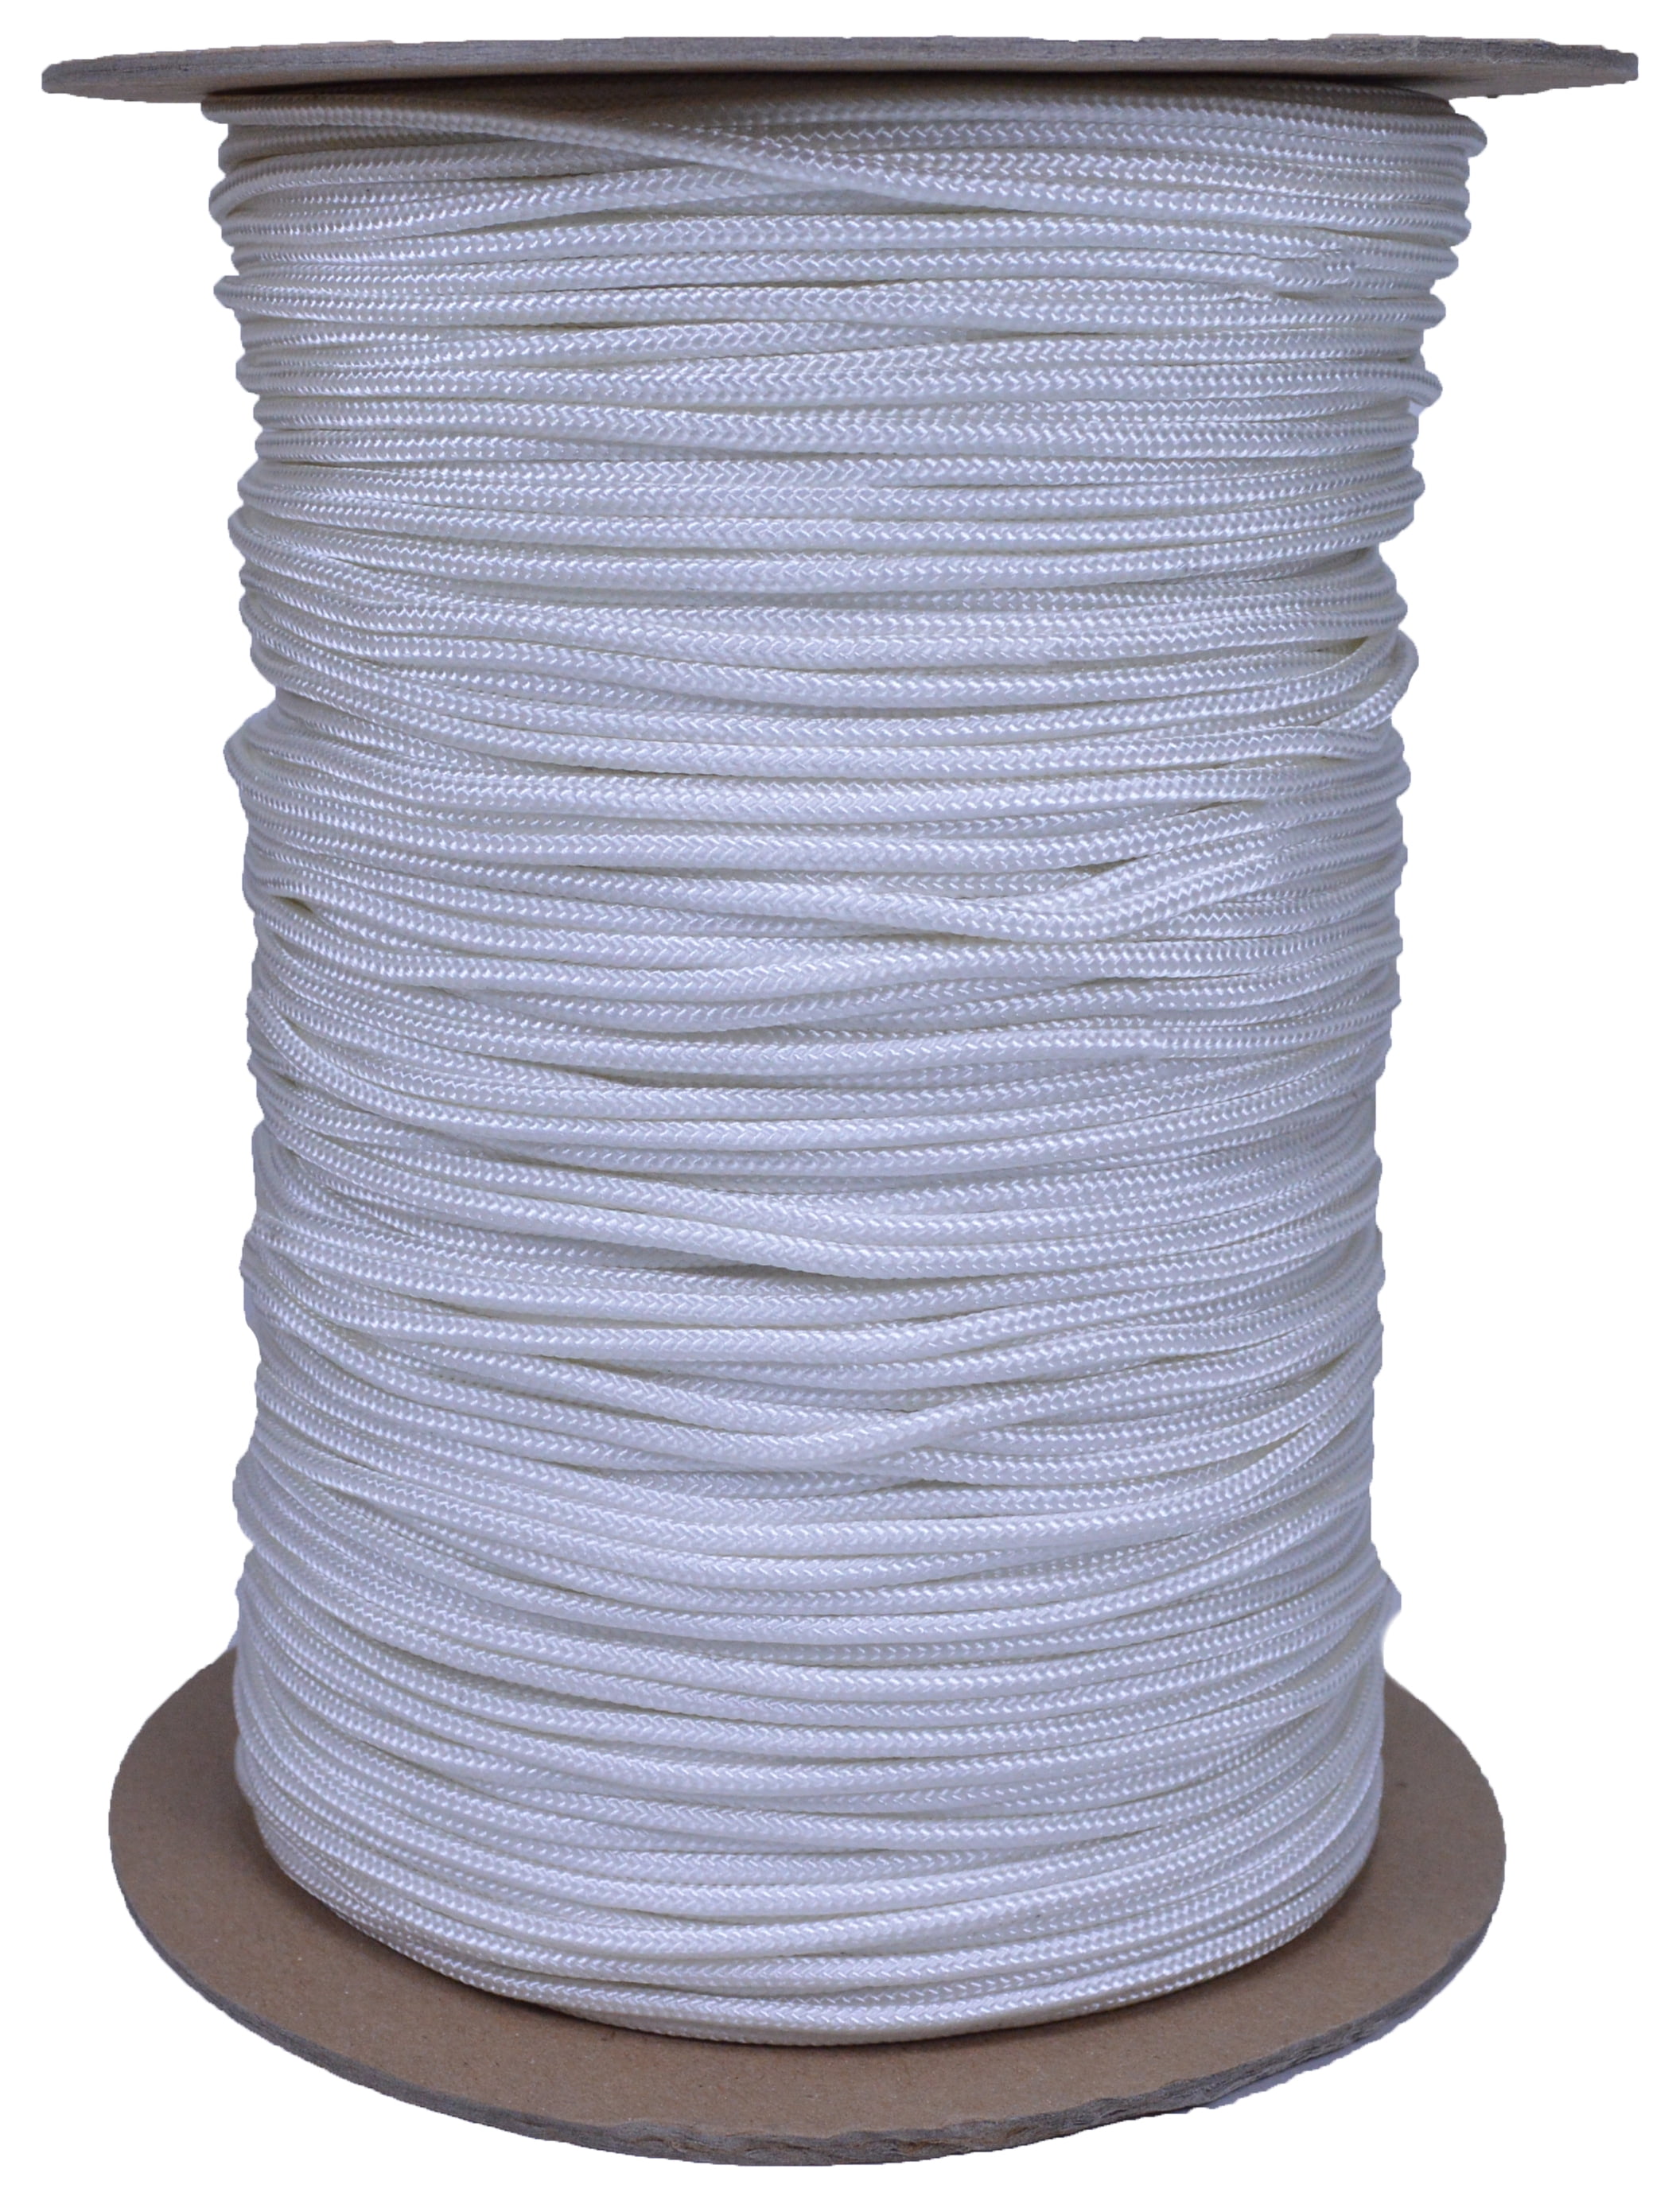 White 325 Cord 3 Strand Paracord - 1000 Foot Spool 